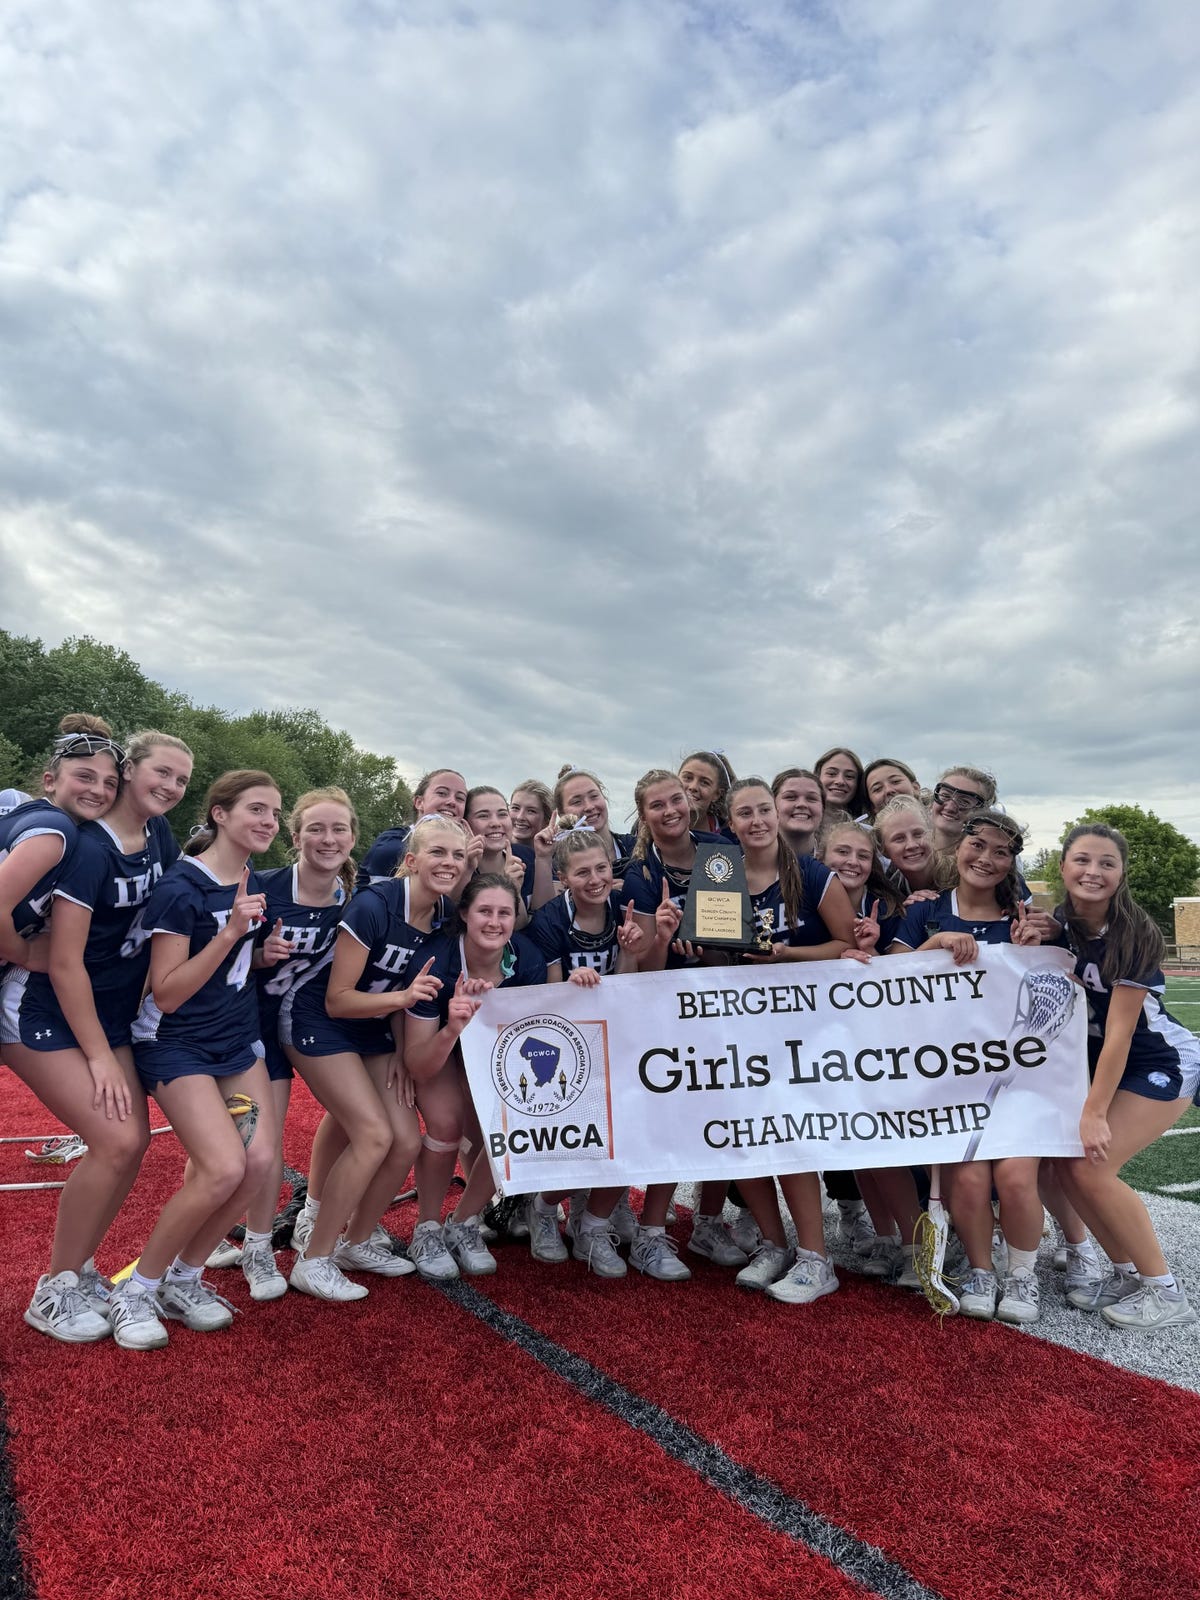 Immaculate Heart Academy Ends Ridgewood’s 18-Year Reign in Bergen County Girls Lacrosse Championship